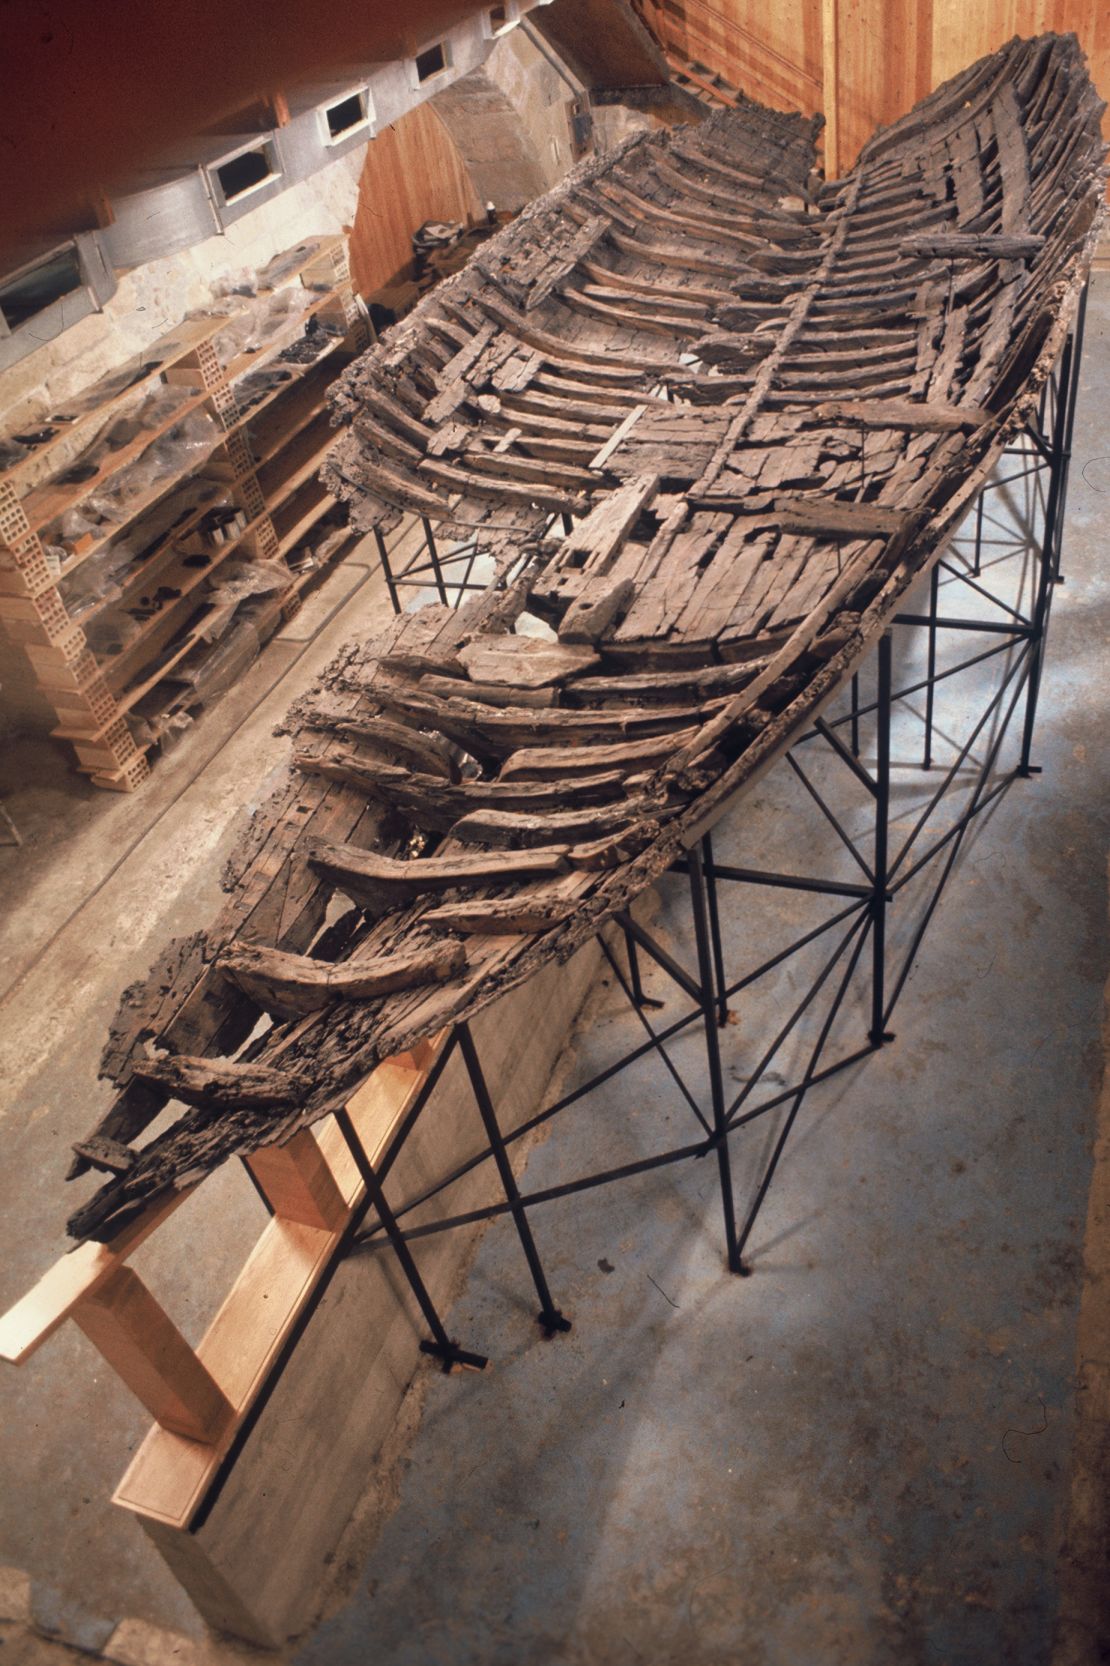 The Kyrenia ship's hull is seen shortly after it was raised from the seabed and reassembled.